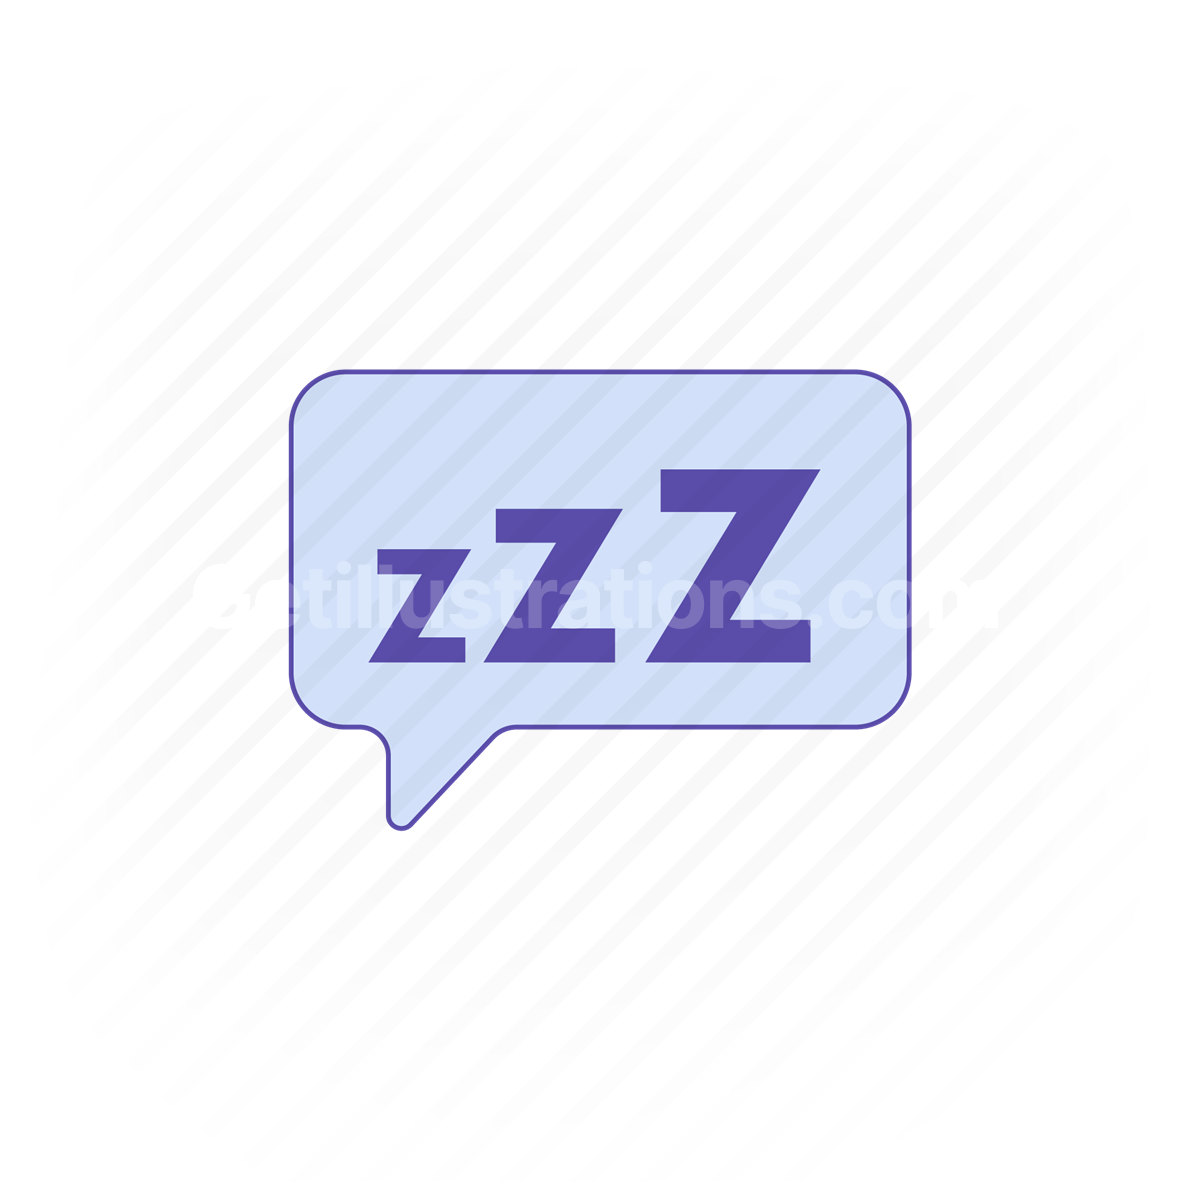 snooze, sleep, tired, exhausted, message